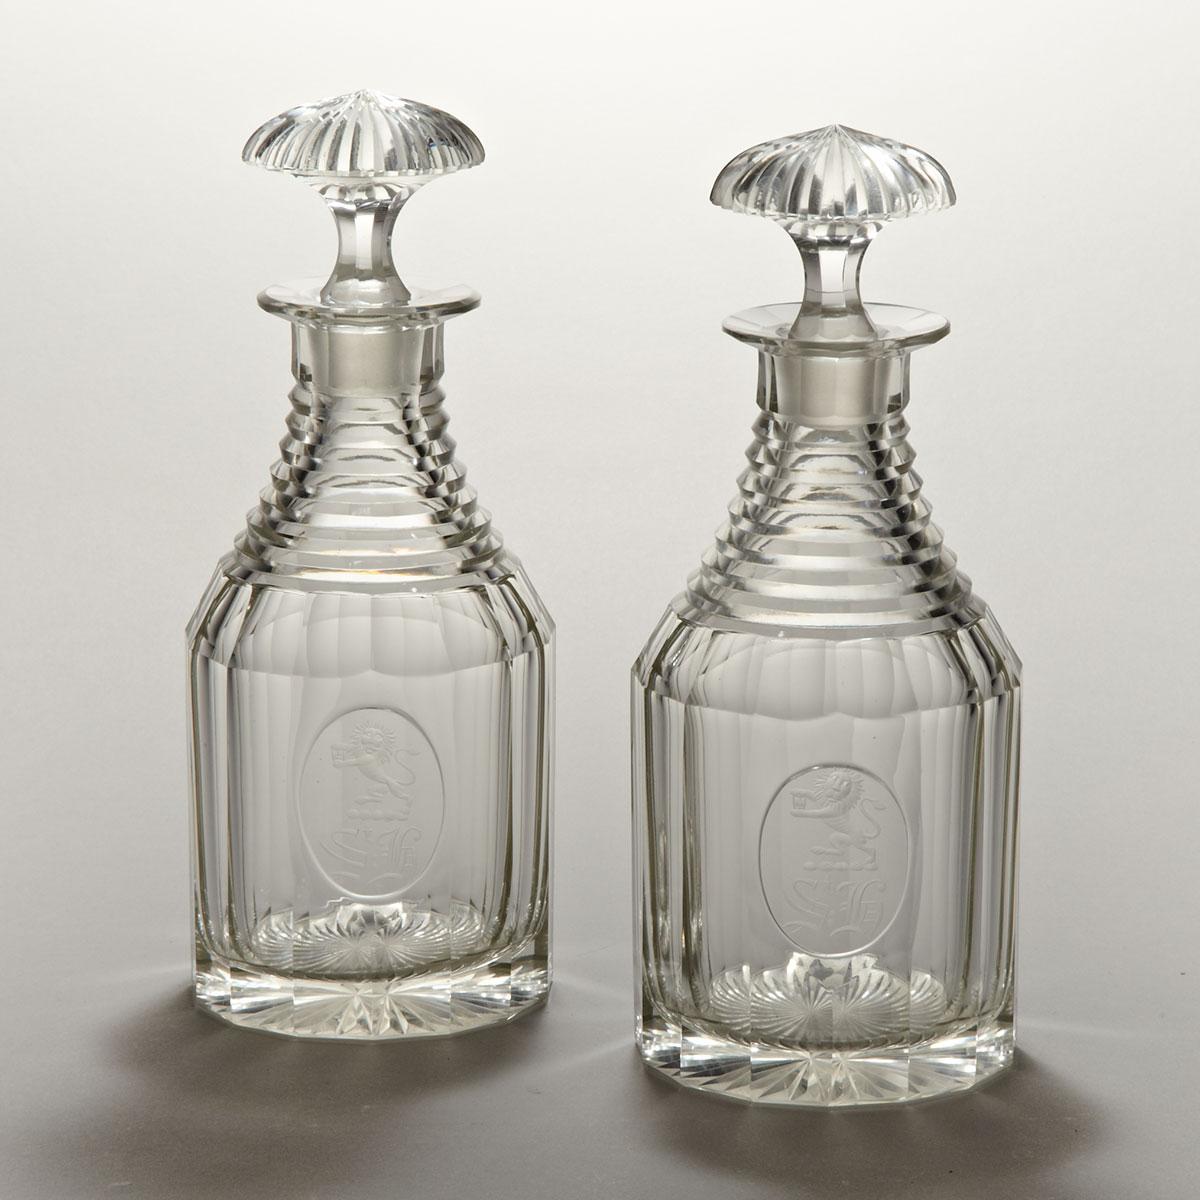 Pair of Anglo-Irish Cut Glass Decanters, 19th century